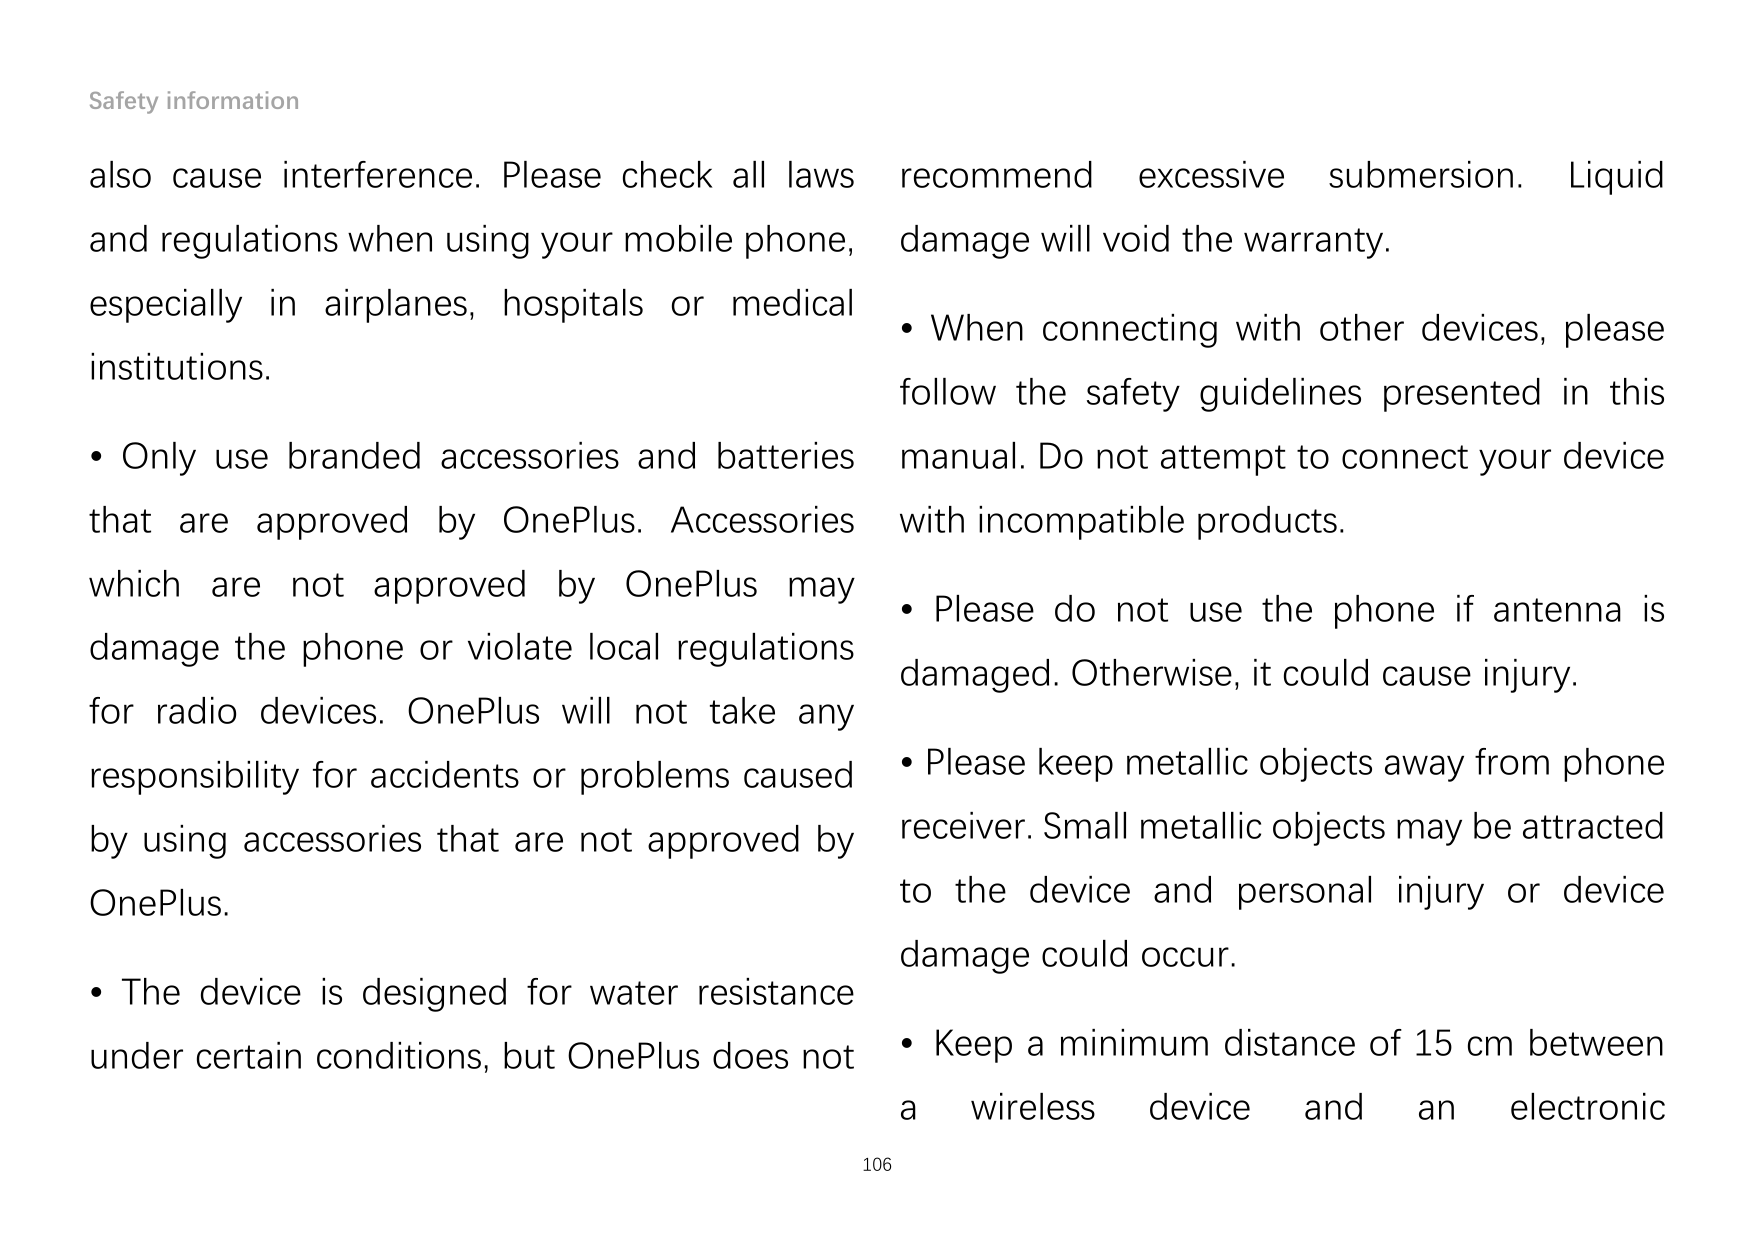 Safety informationalso cause interference. Please check all lawsrecommendand regulations when using your mobile phone,damage wil